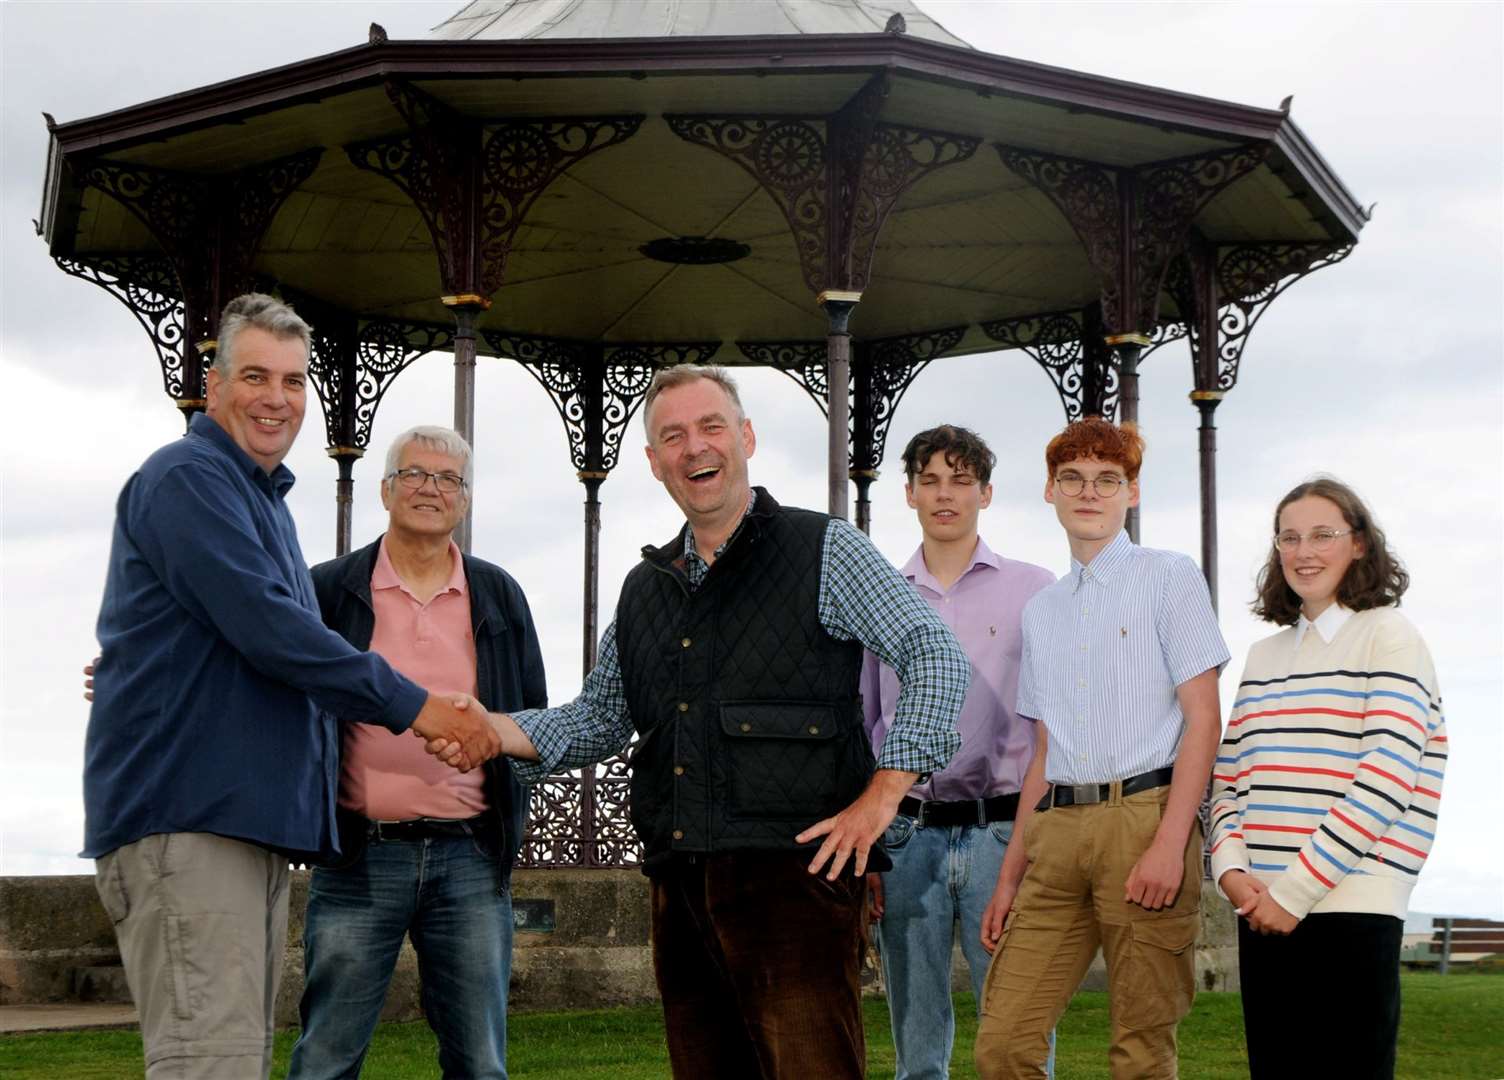 Ronsch family meet the Nairn Games Committee: Stuart Farrell, Nairn Games Secretary, Donald Wilson, Nairn Games Committee member, Hendrik, Lewis, Scott and Romy Ronsch. Picture: James Mackenzie.